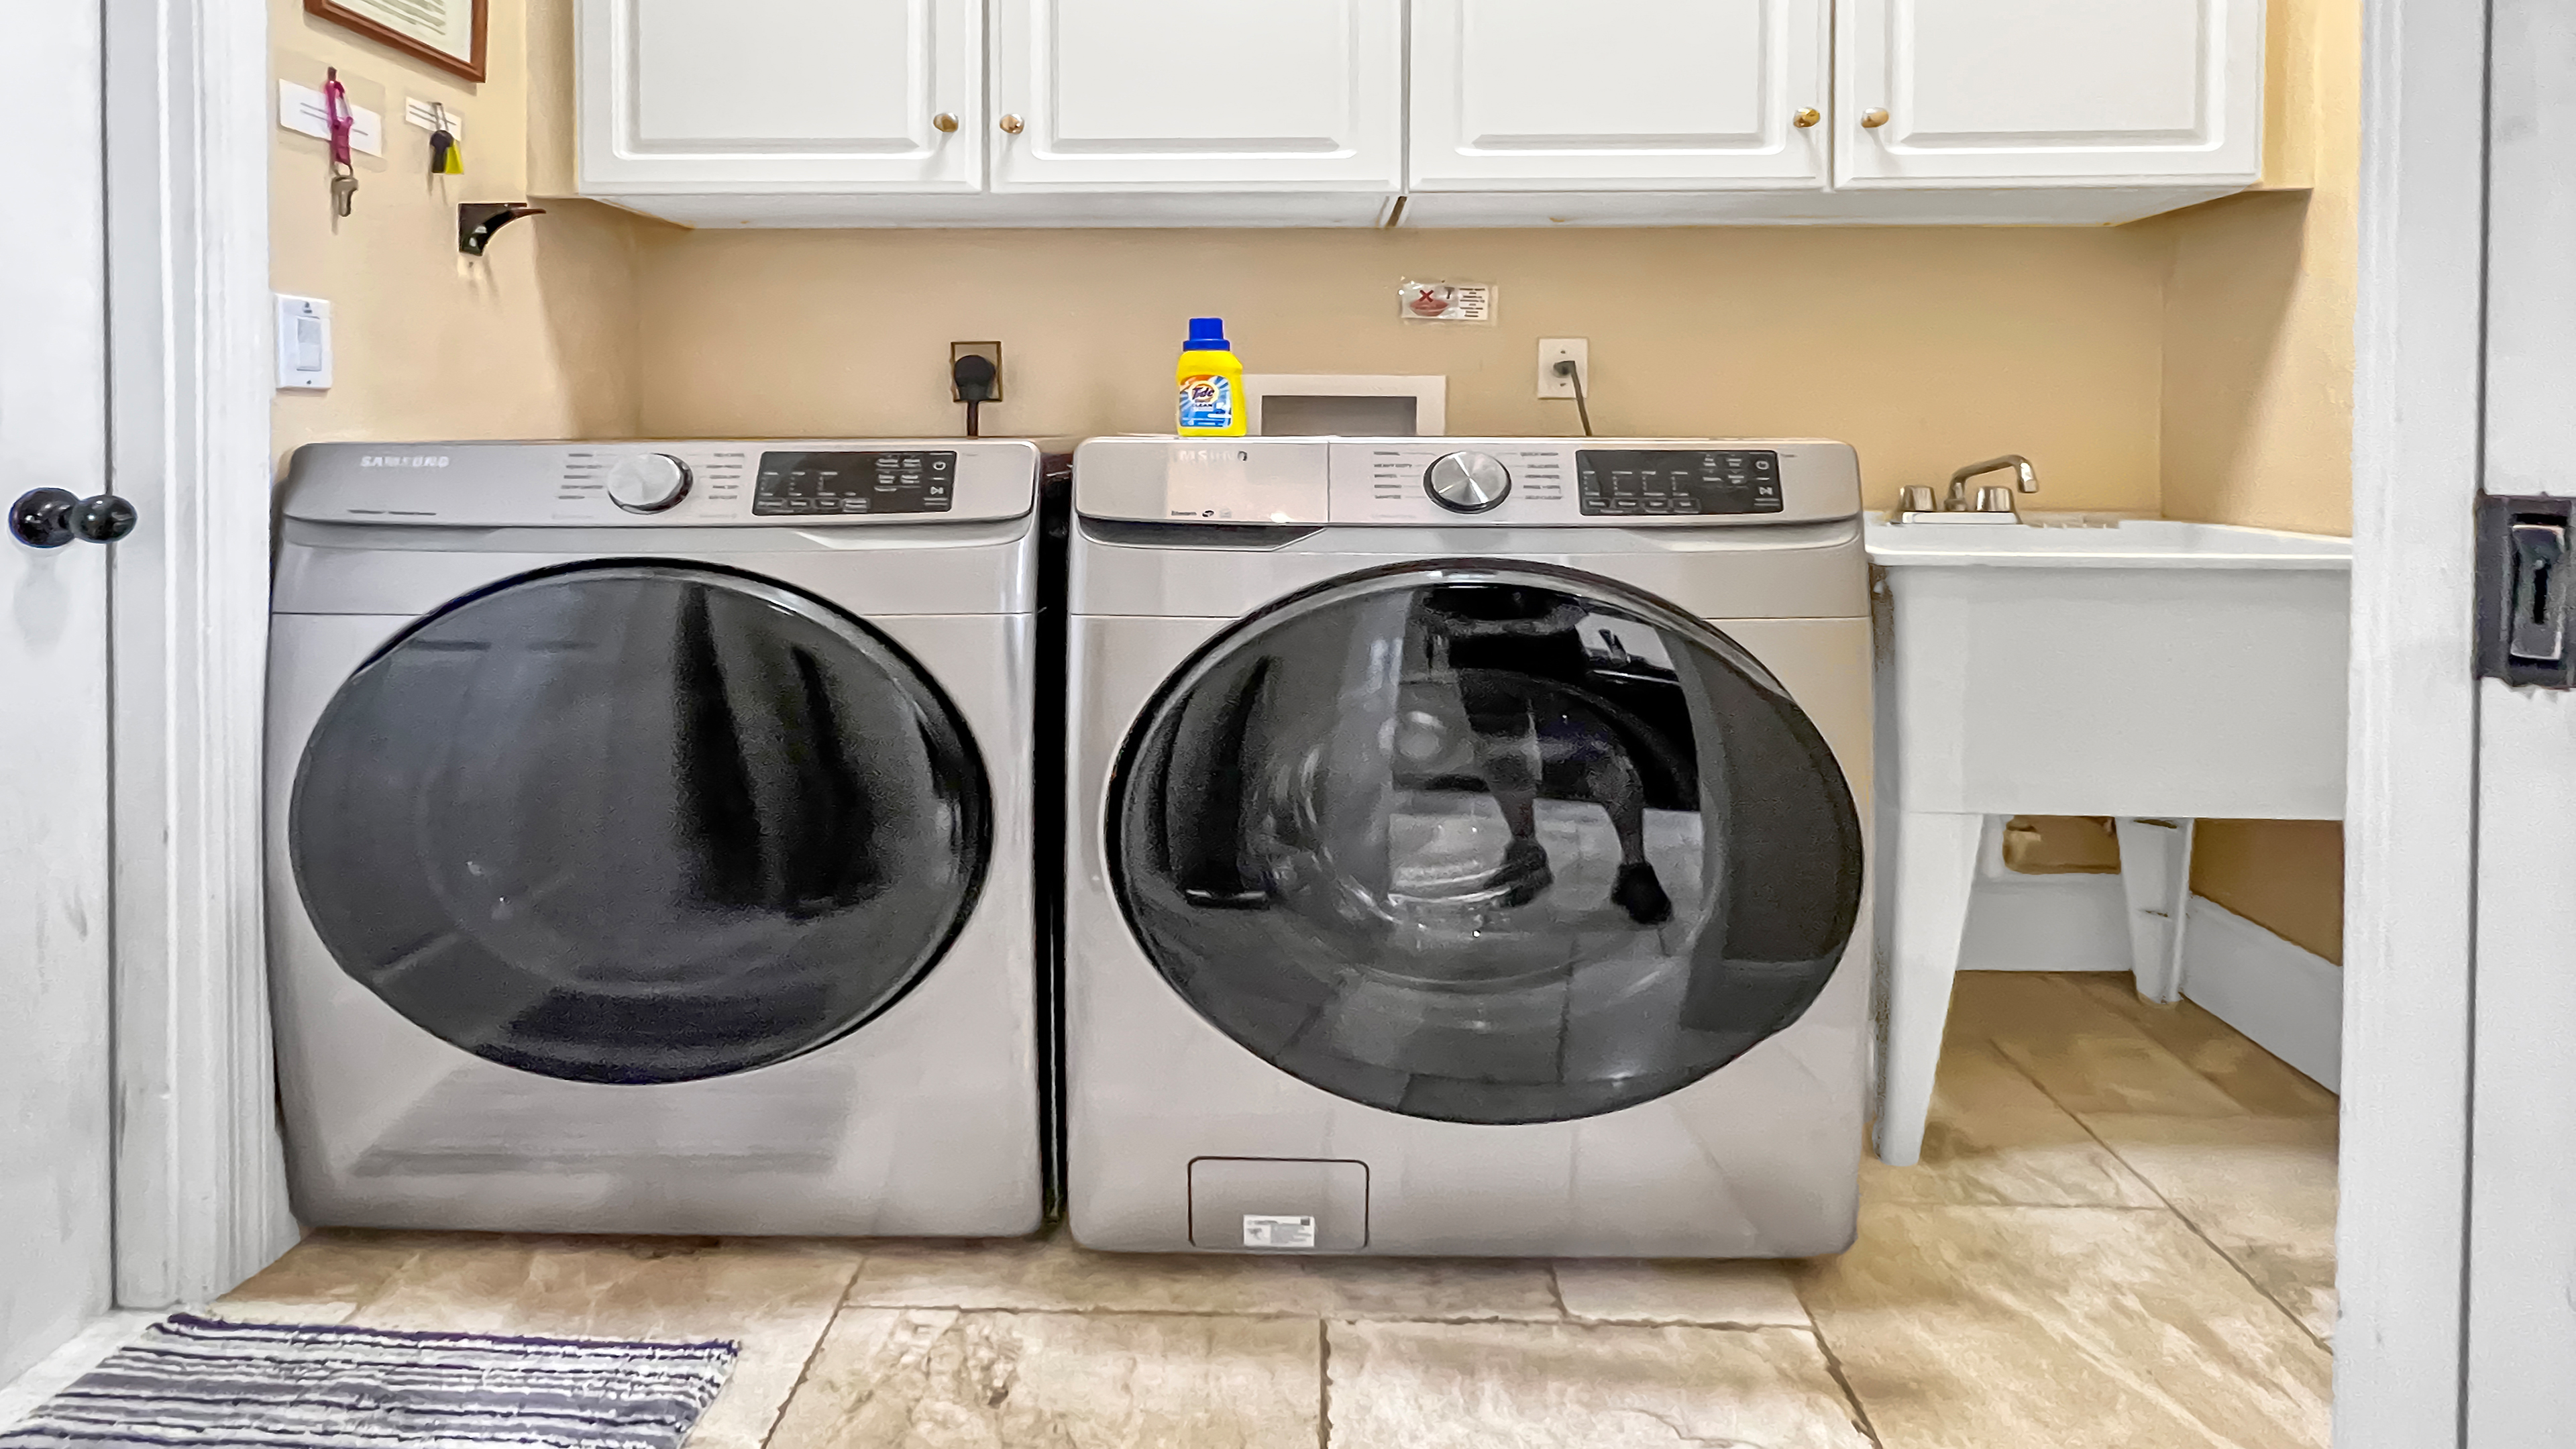 Washer and dryer in the laundry room 